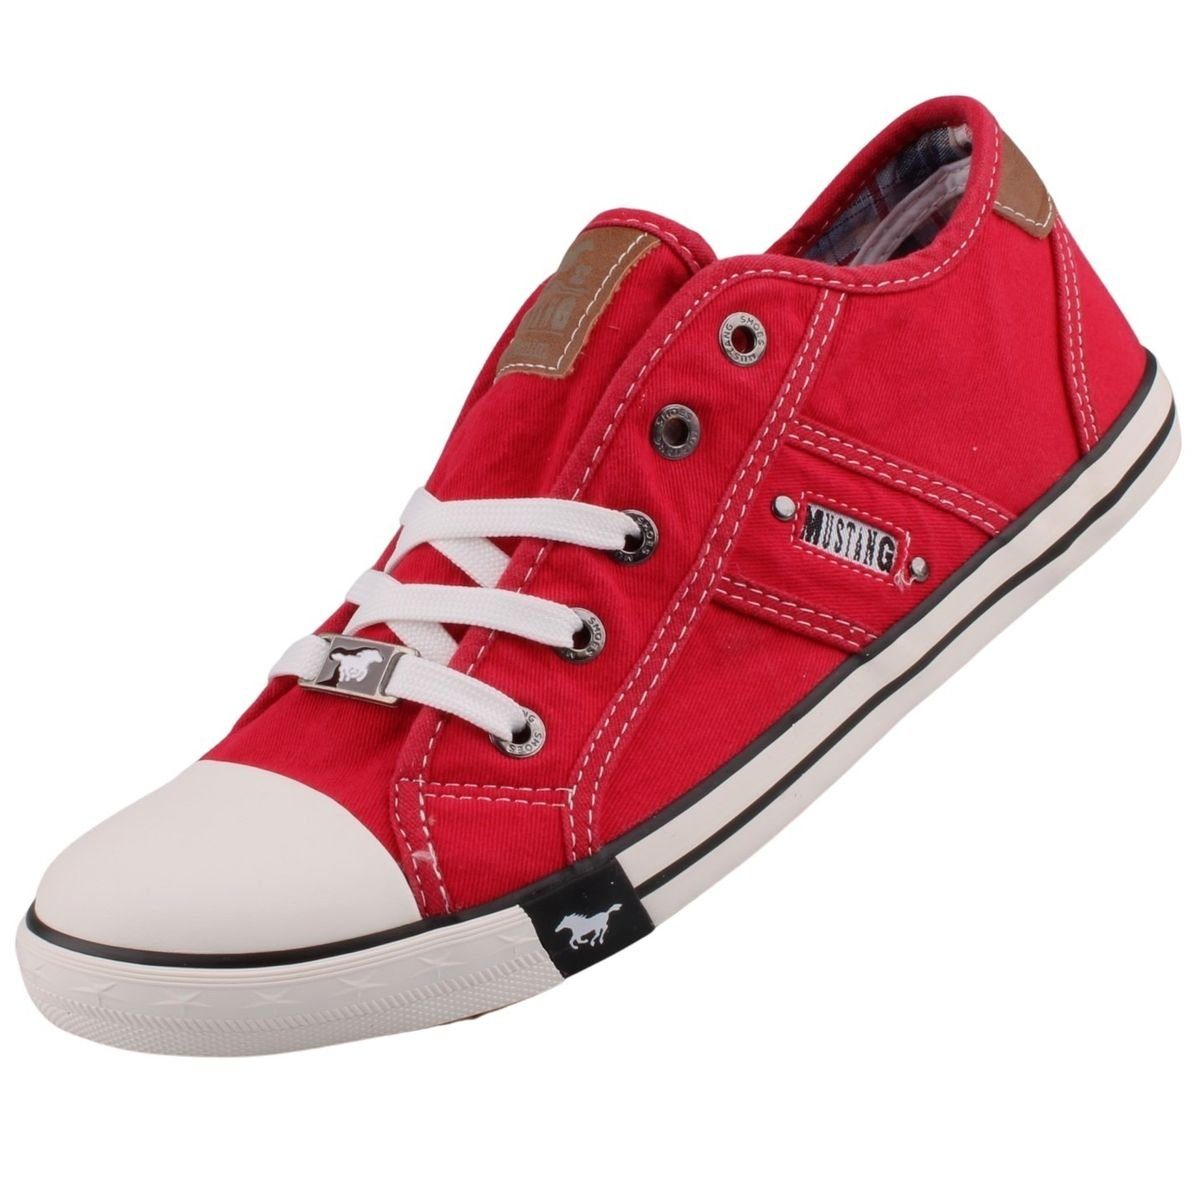 1099302/5 Shoes Rot Sneaker Mustang